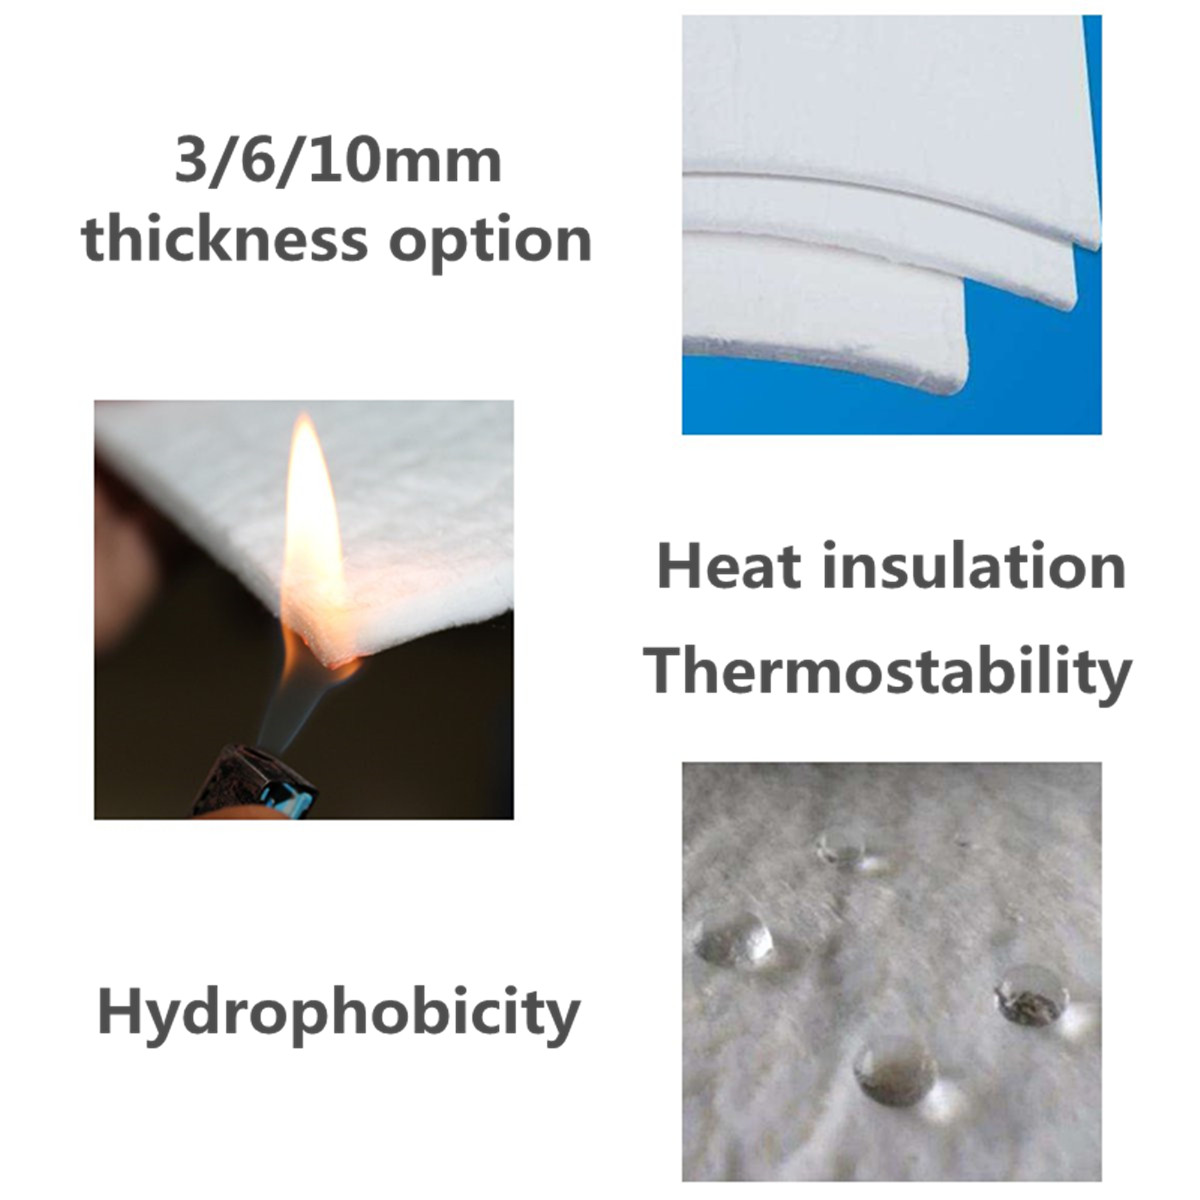 3610mm-Aerogel-Insulation-Hydrophobic-Mat-Foot-Low-to-High-Temp-20x15cm-Water-Pipe-Insulation-Mat-1321399-9